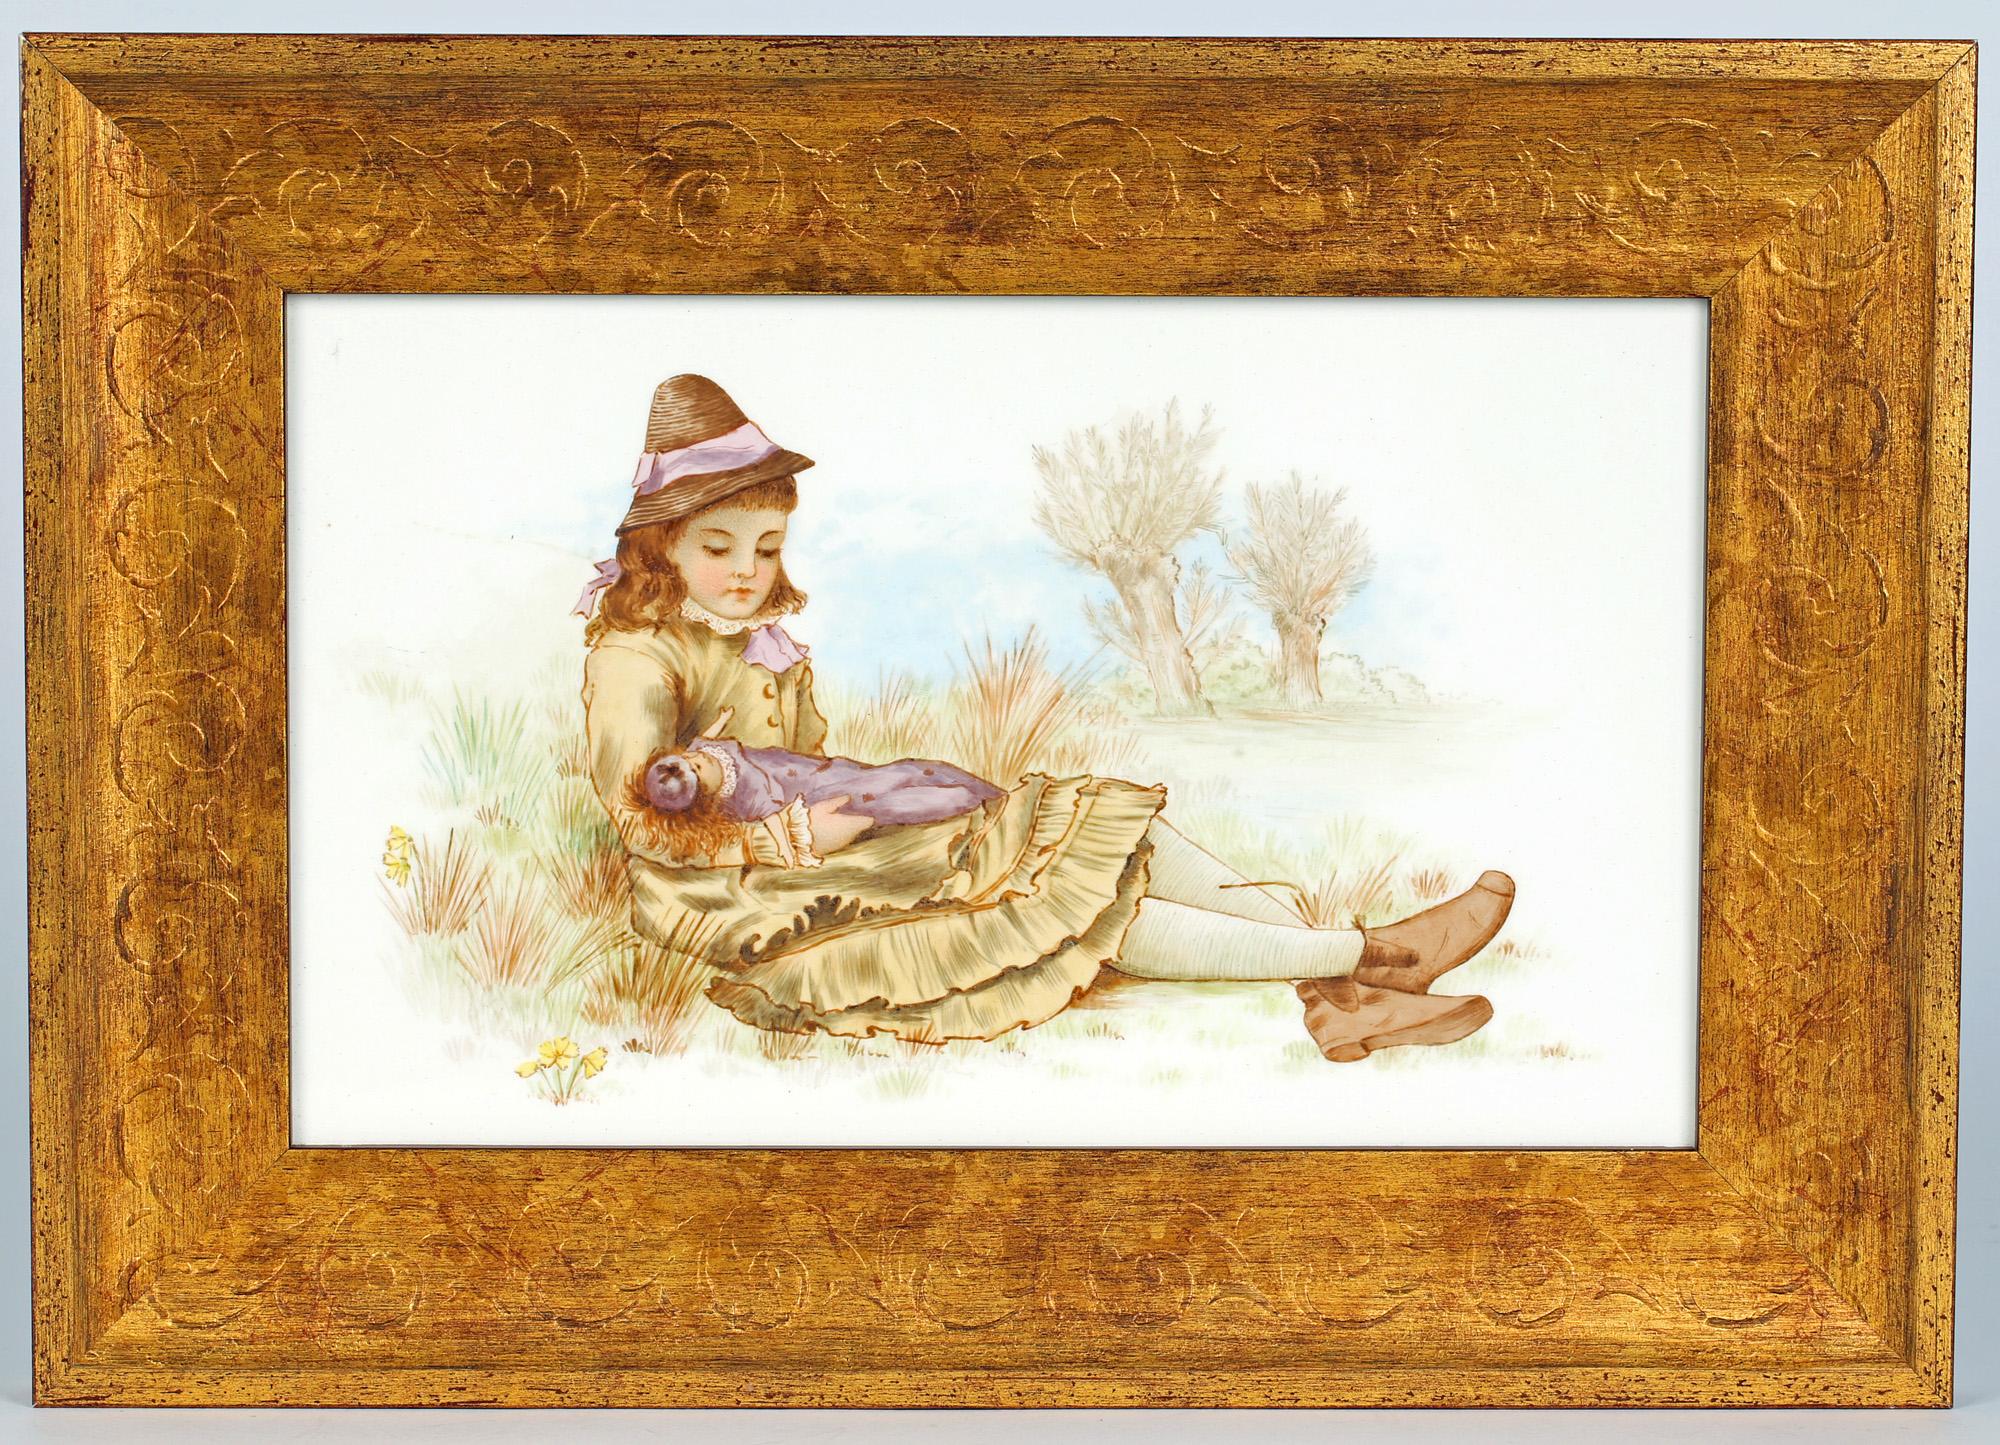 Ceramic Catherine Vargas Doulton Lambeth Faience Hand Painted Framed Plaque, 1877 For Sale